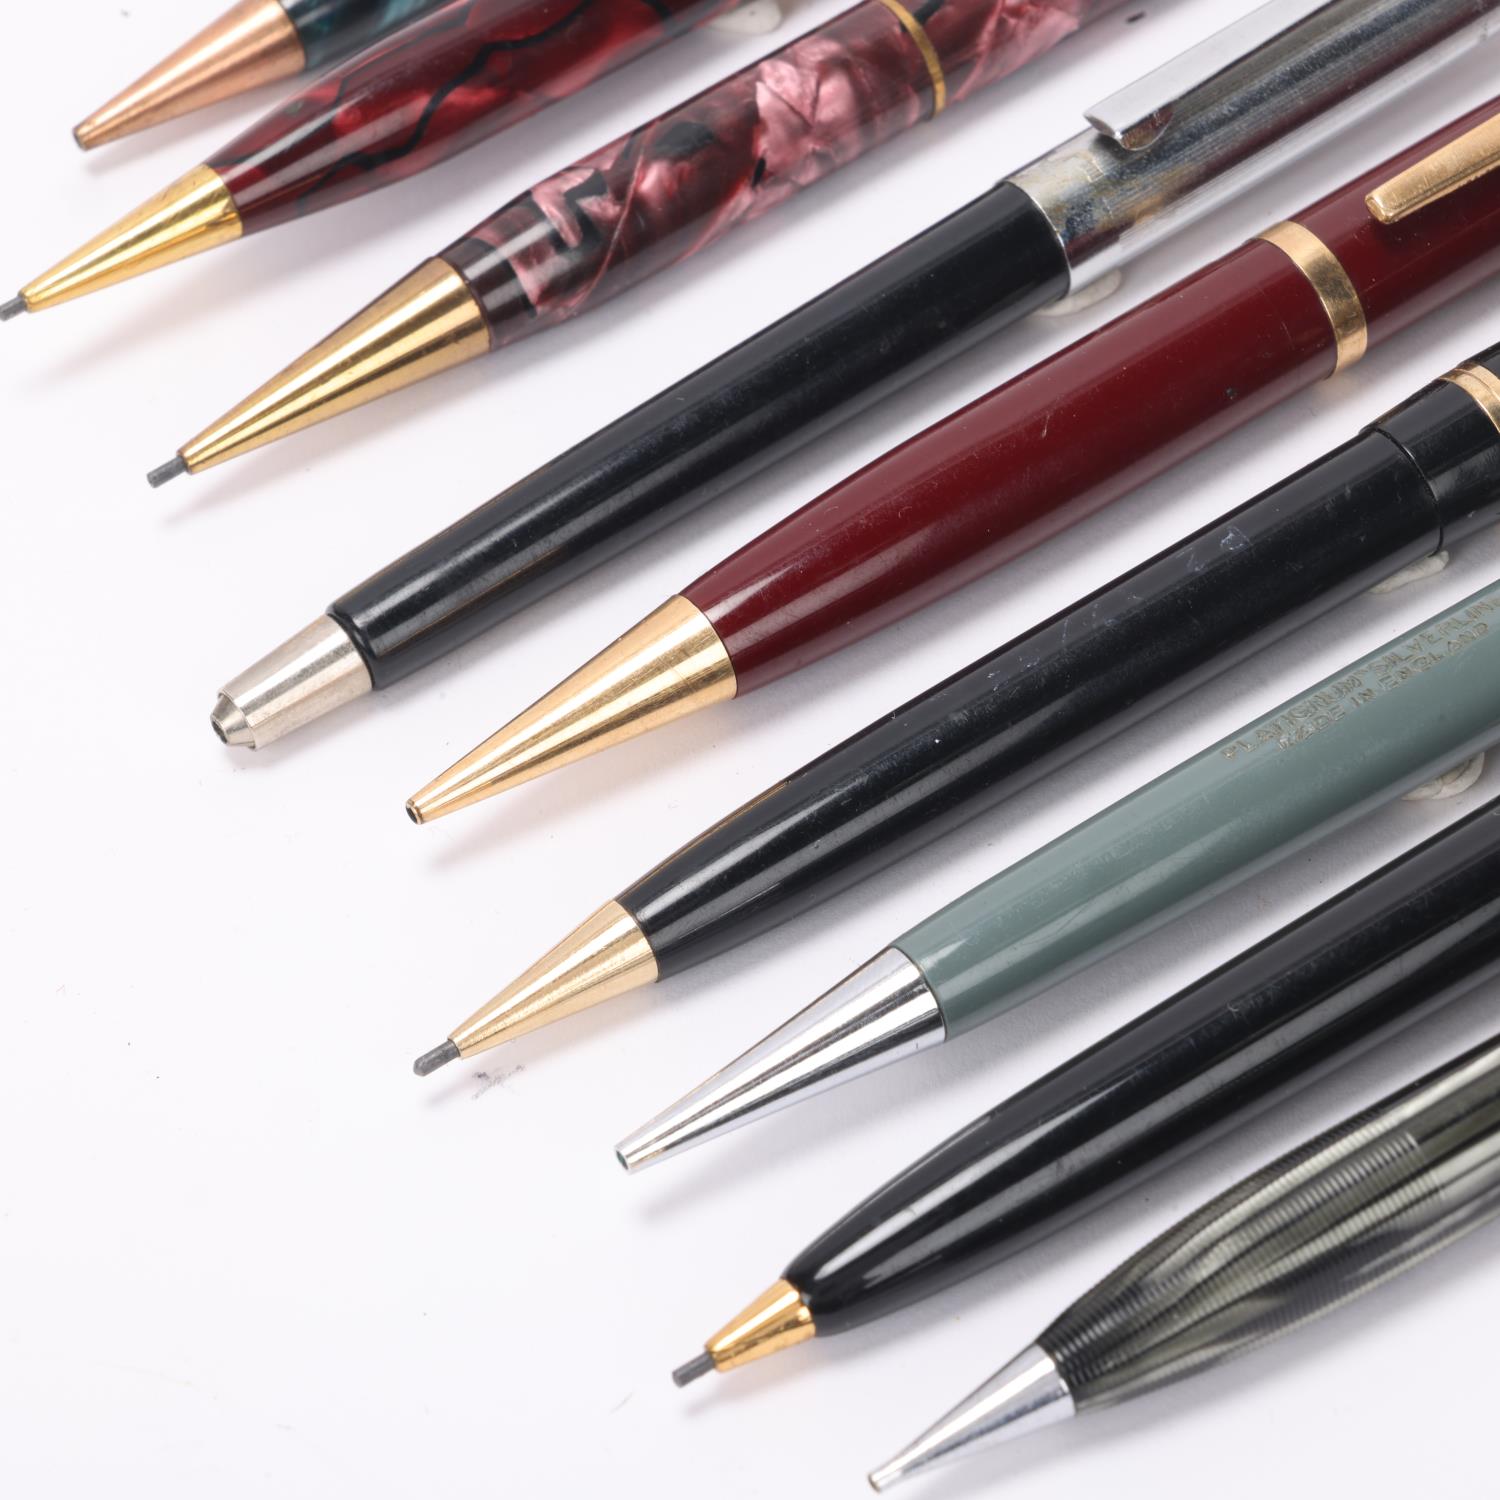 A collection of 9 vintage propelling pencils, including models by Onoto, Conway, Sheaffer, - Image 2 of 4